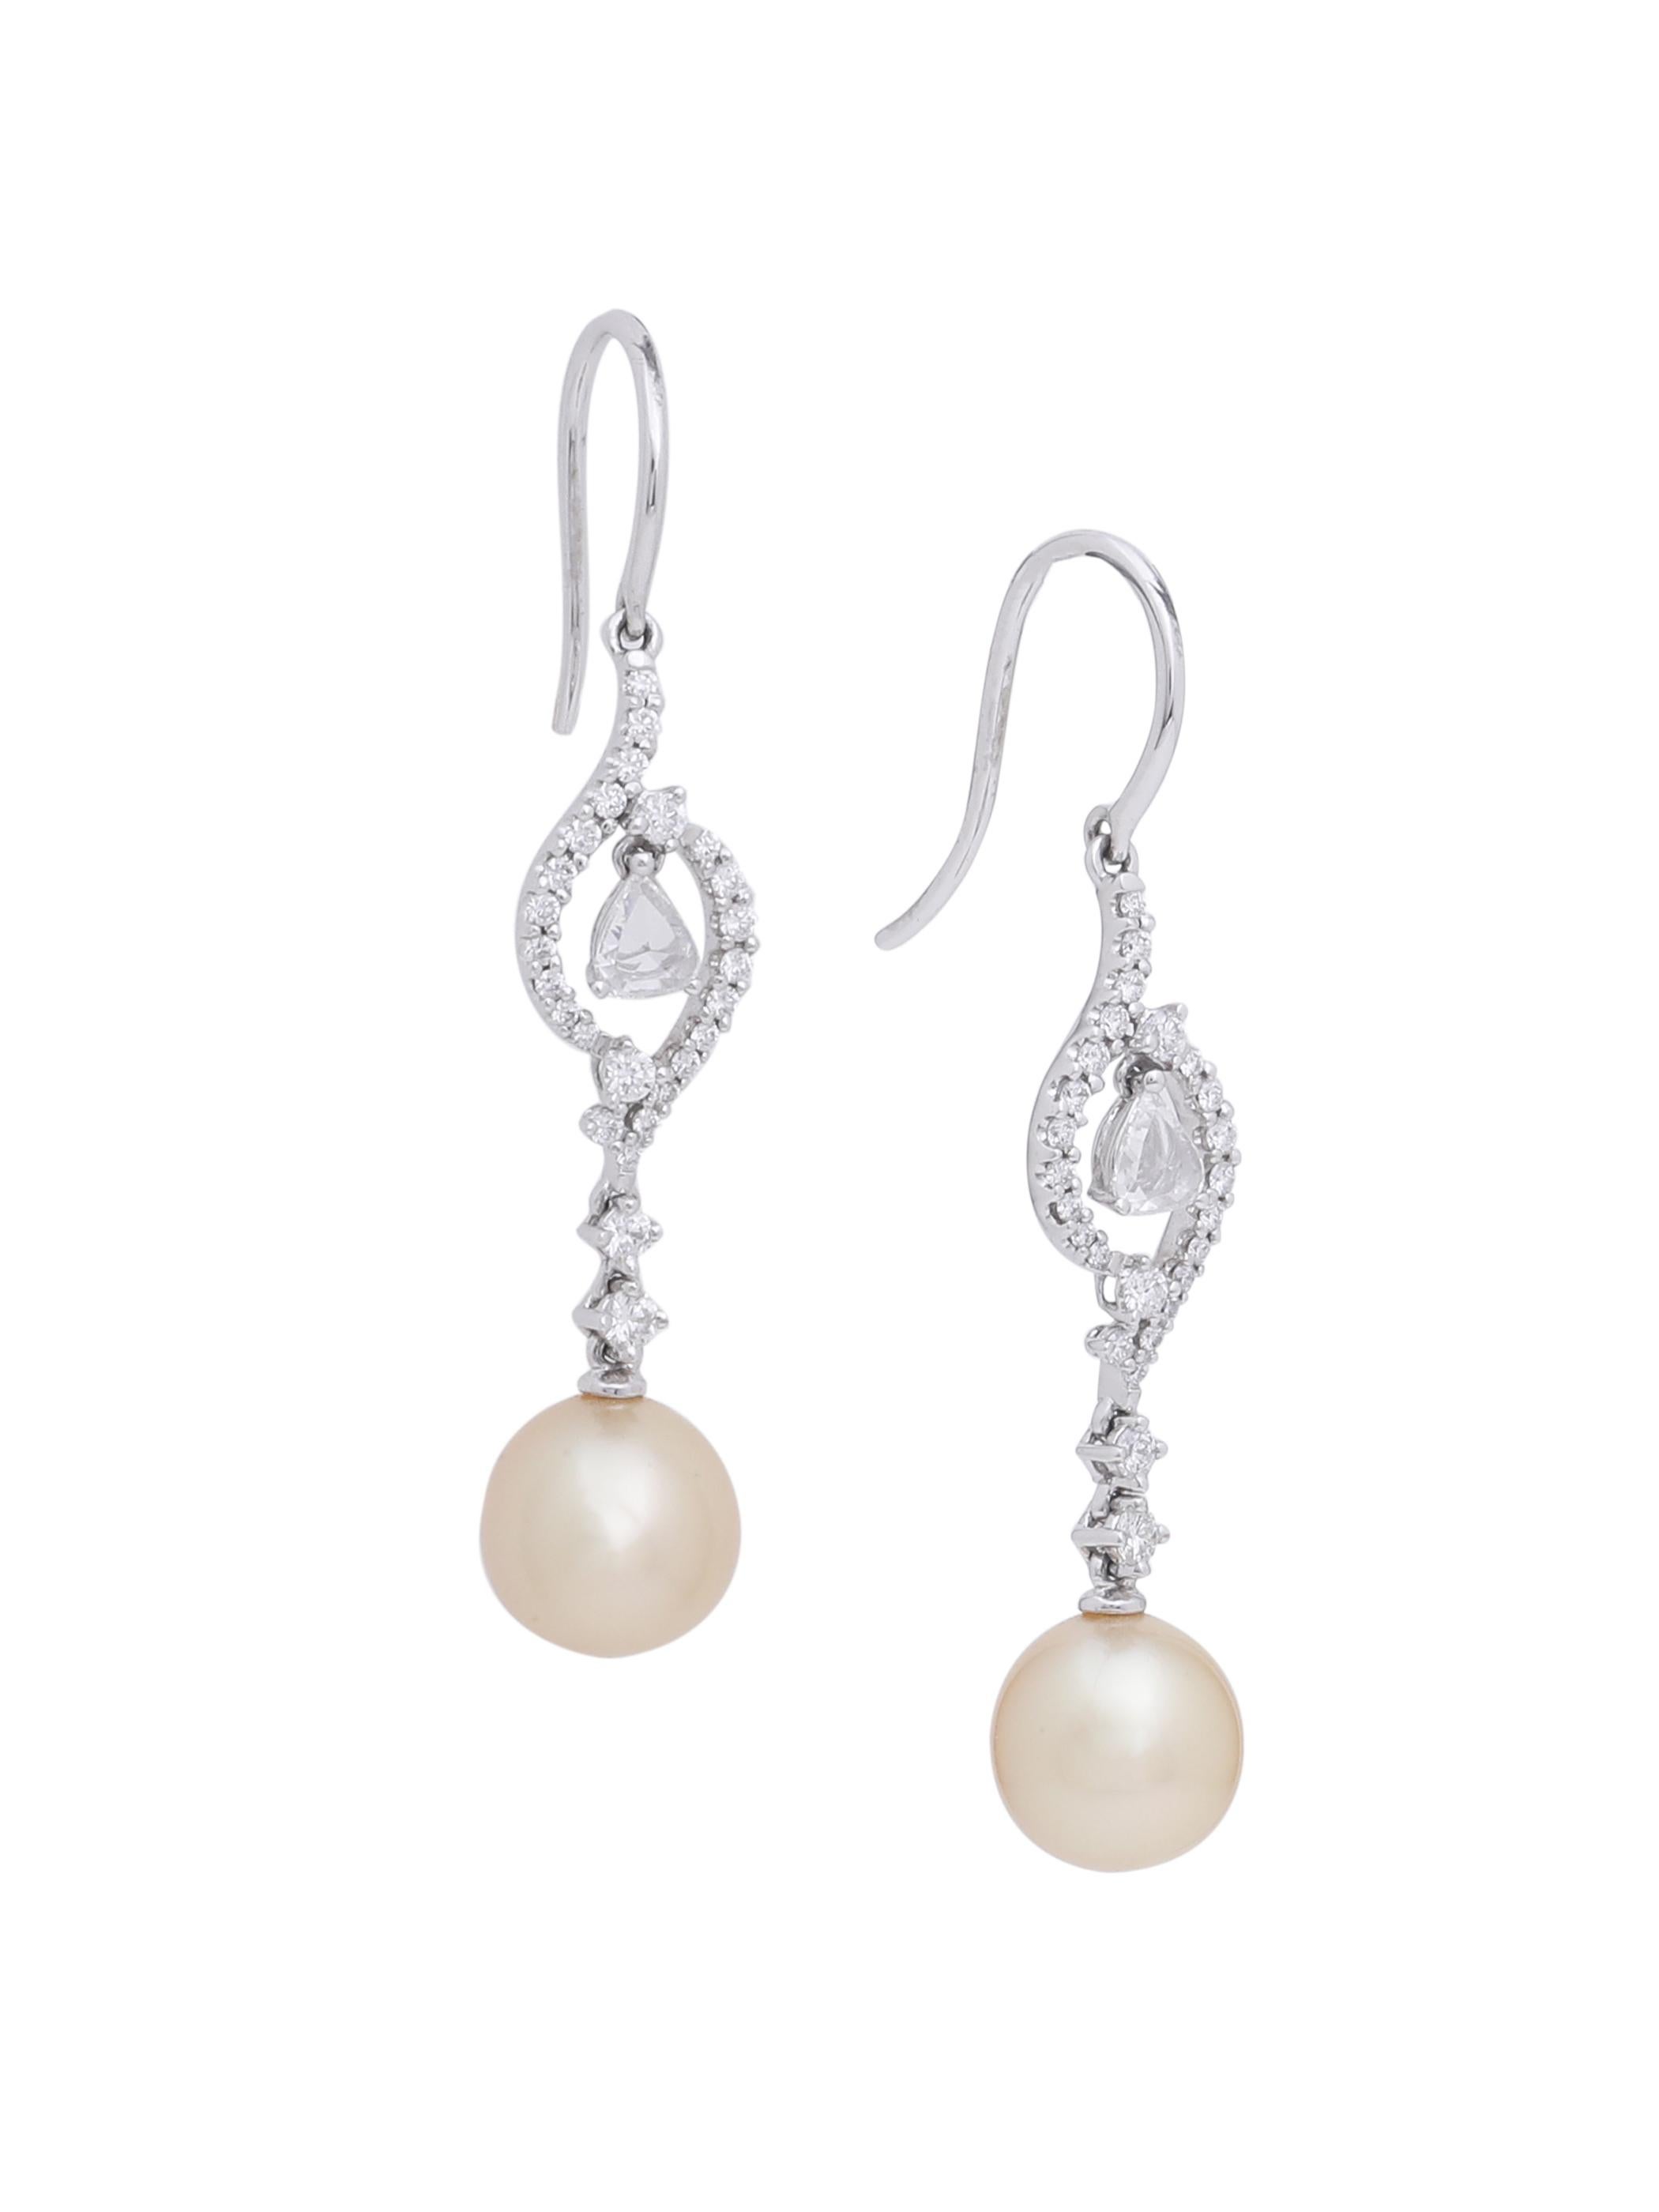 Pear Cut Dangling Earrings with Diamond and South Sea Pearls Set in 18 Karat White Gold